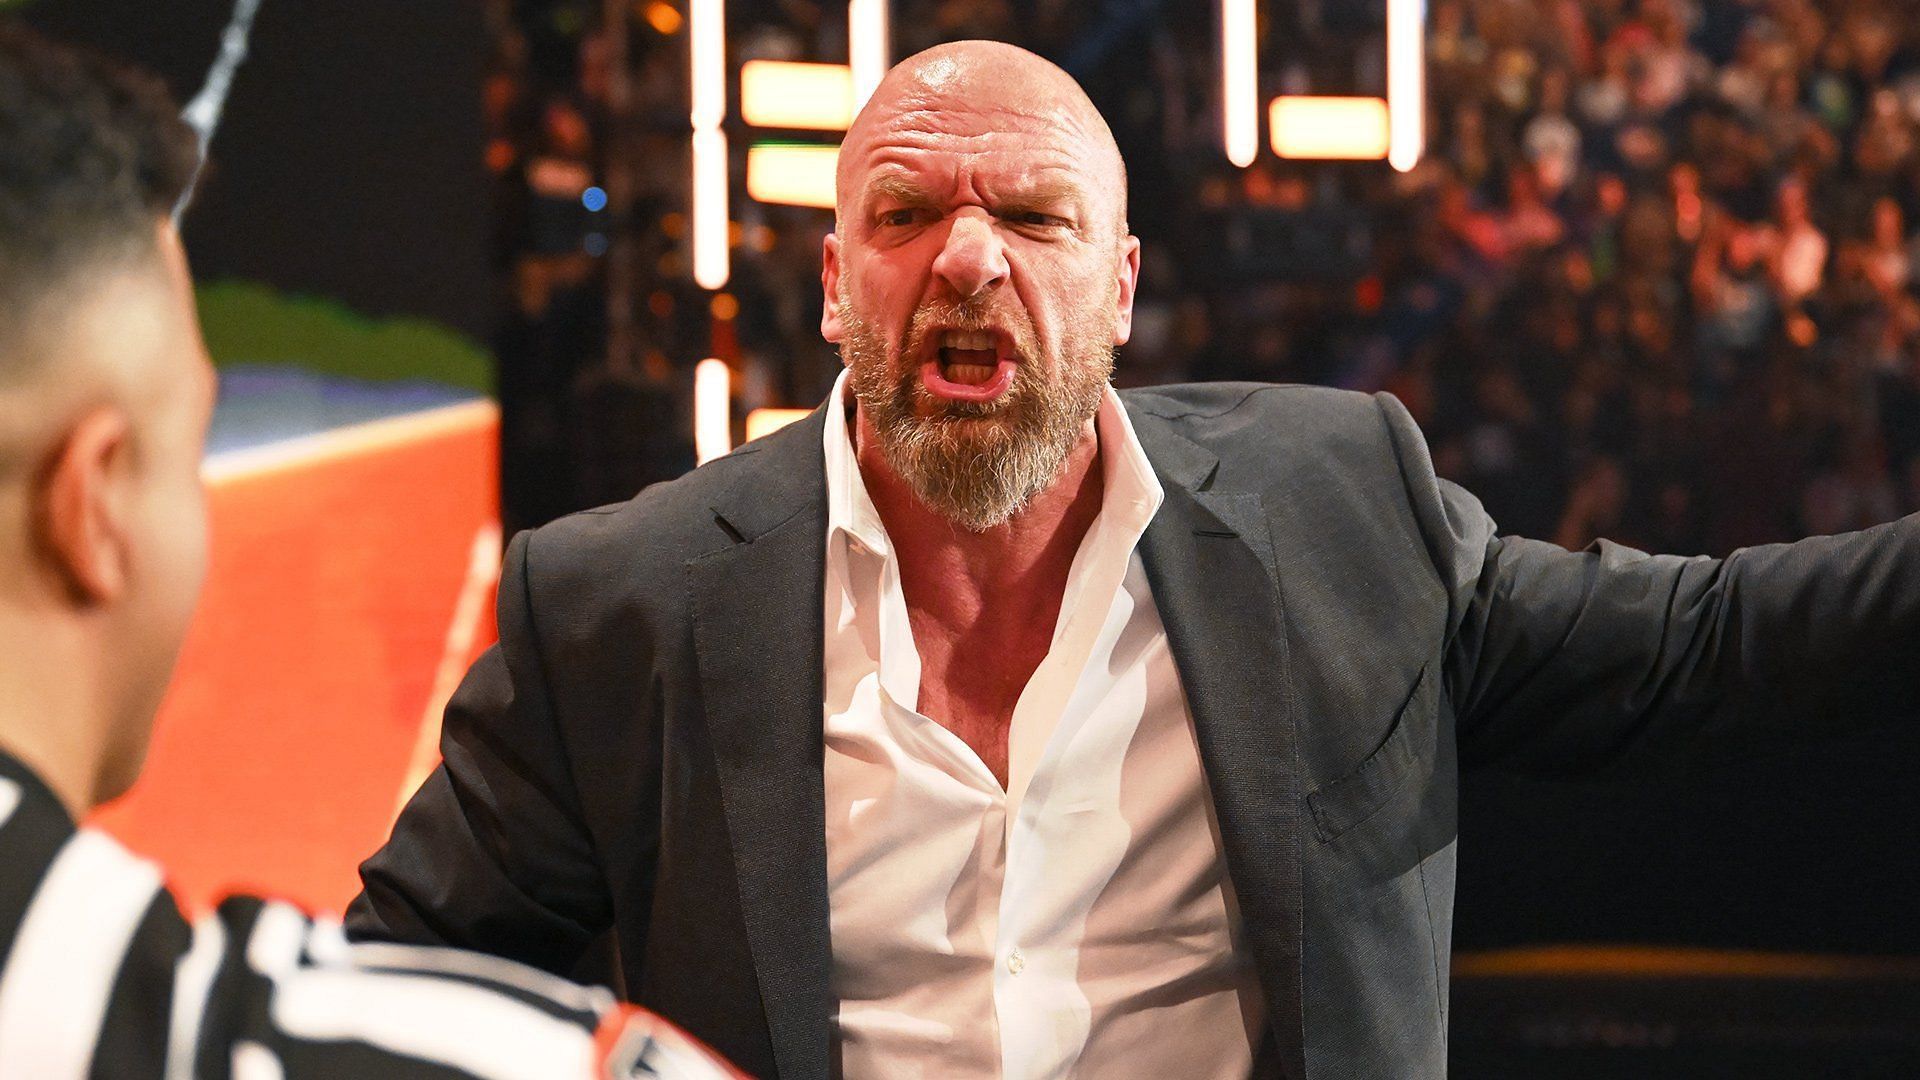 WWE Chief Content Officer Triple H tries to restore order